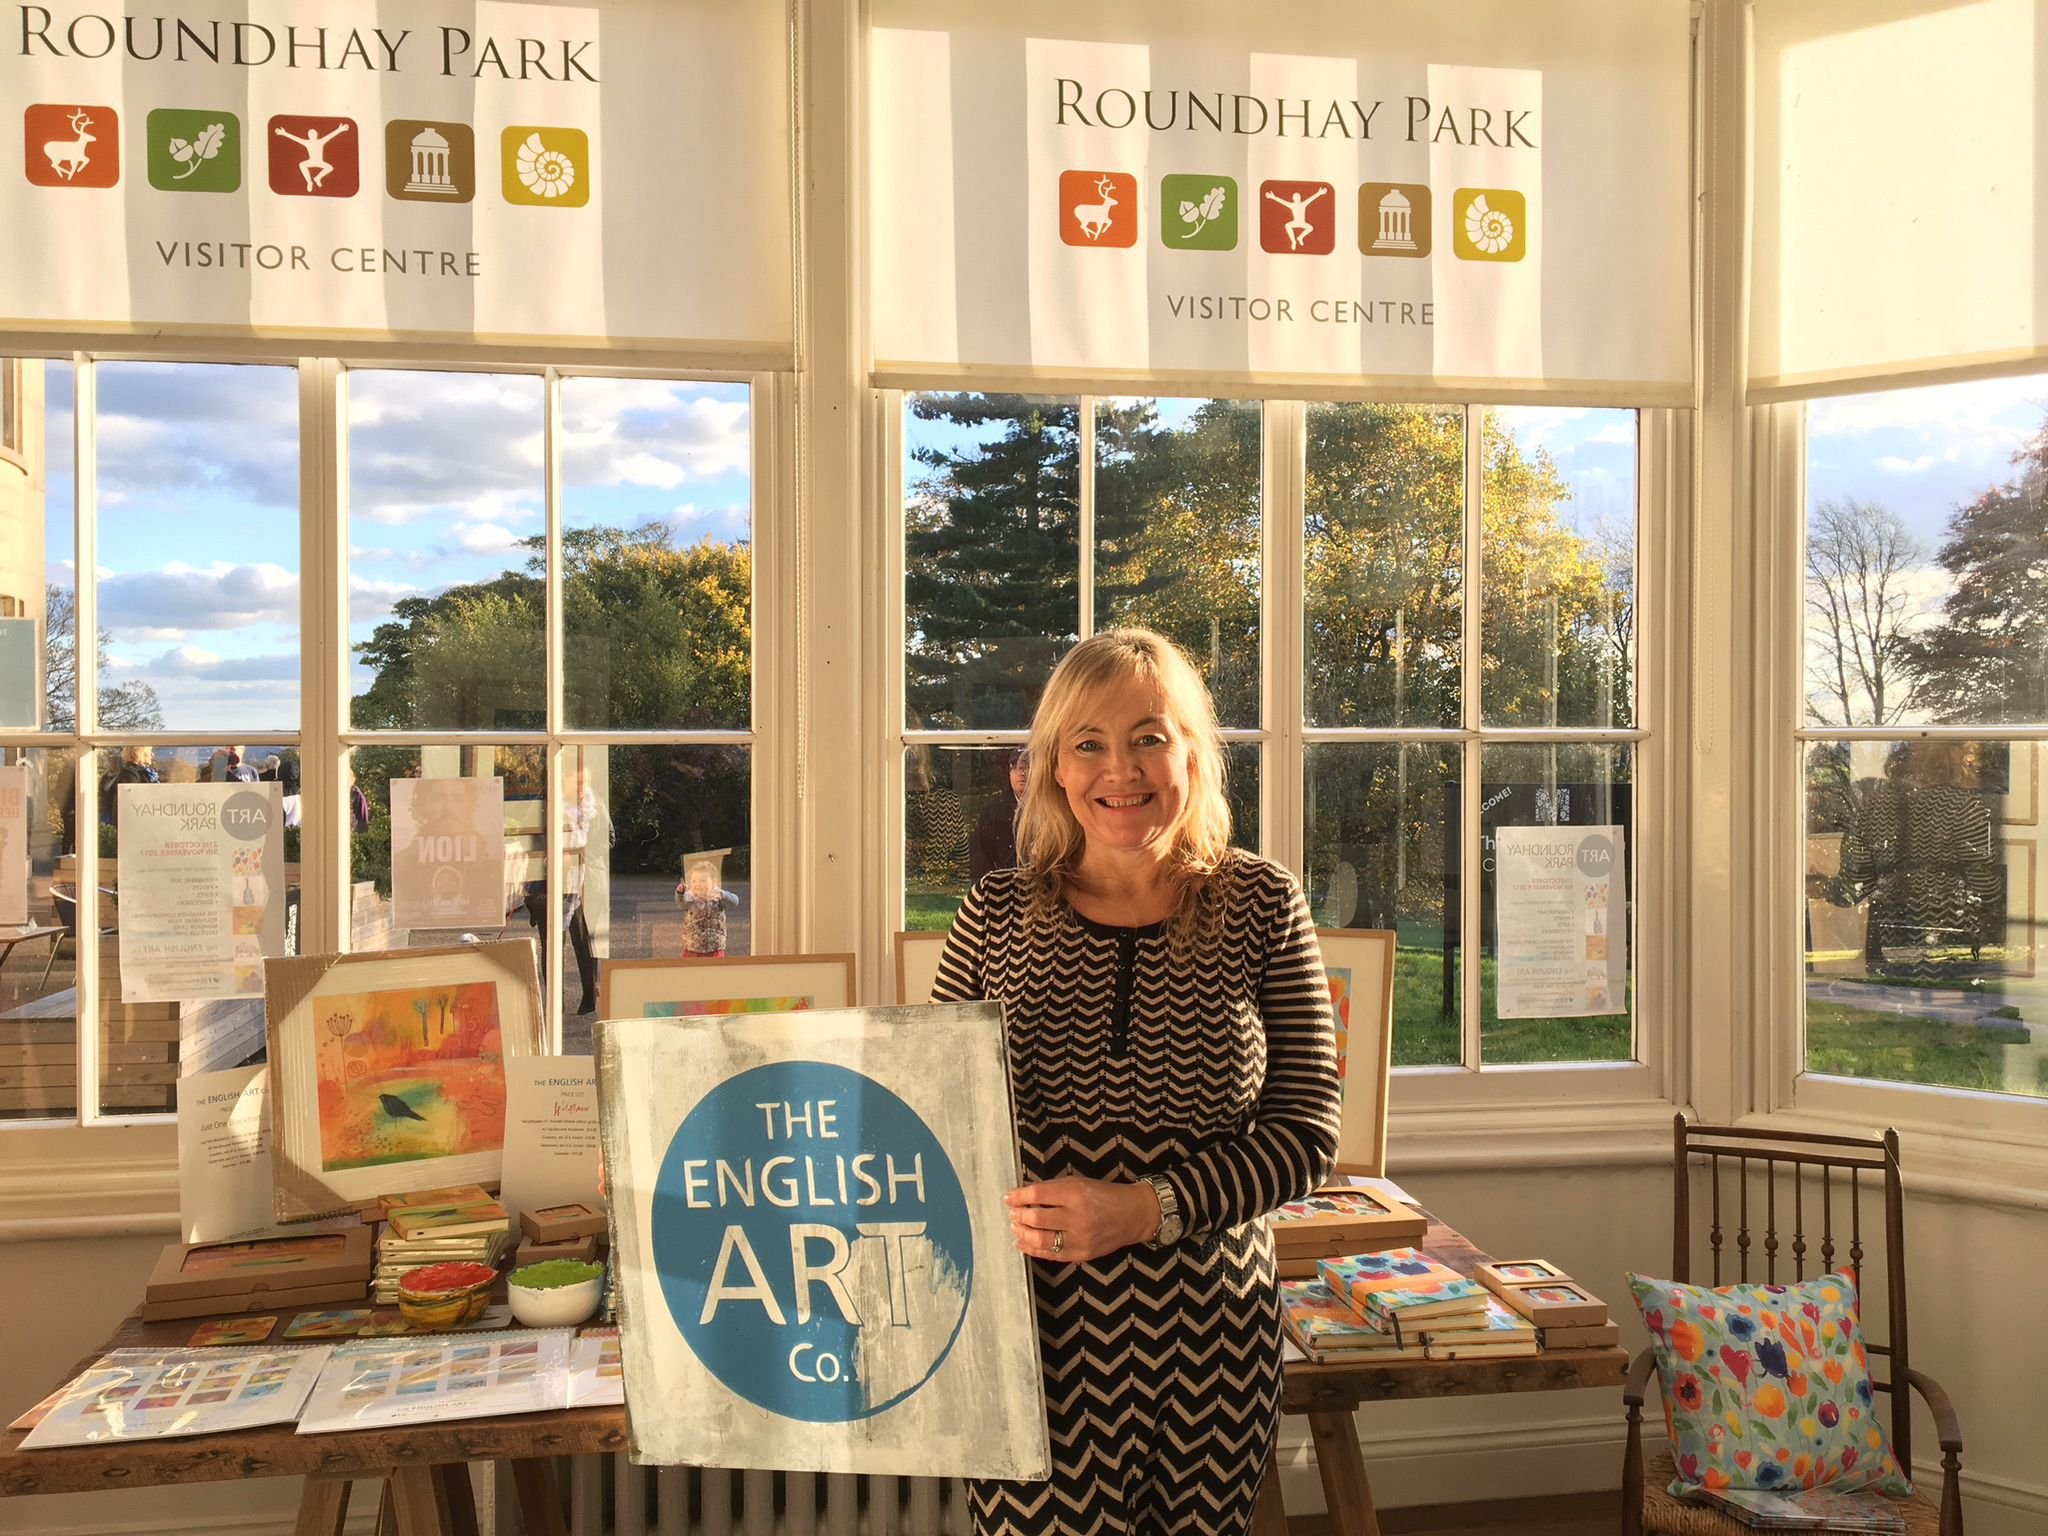 A message from Catriona on Art Roundhay Park's birthday 🎉🎈🎊

&quot;Thank you for your support over the last 5 years. We&rsquo;d also like to thank @dinevenues, @friendsofroundhaypark and @lccparksandcountryside for their continued support.

So far